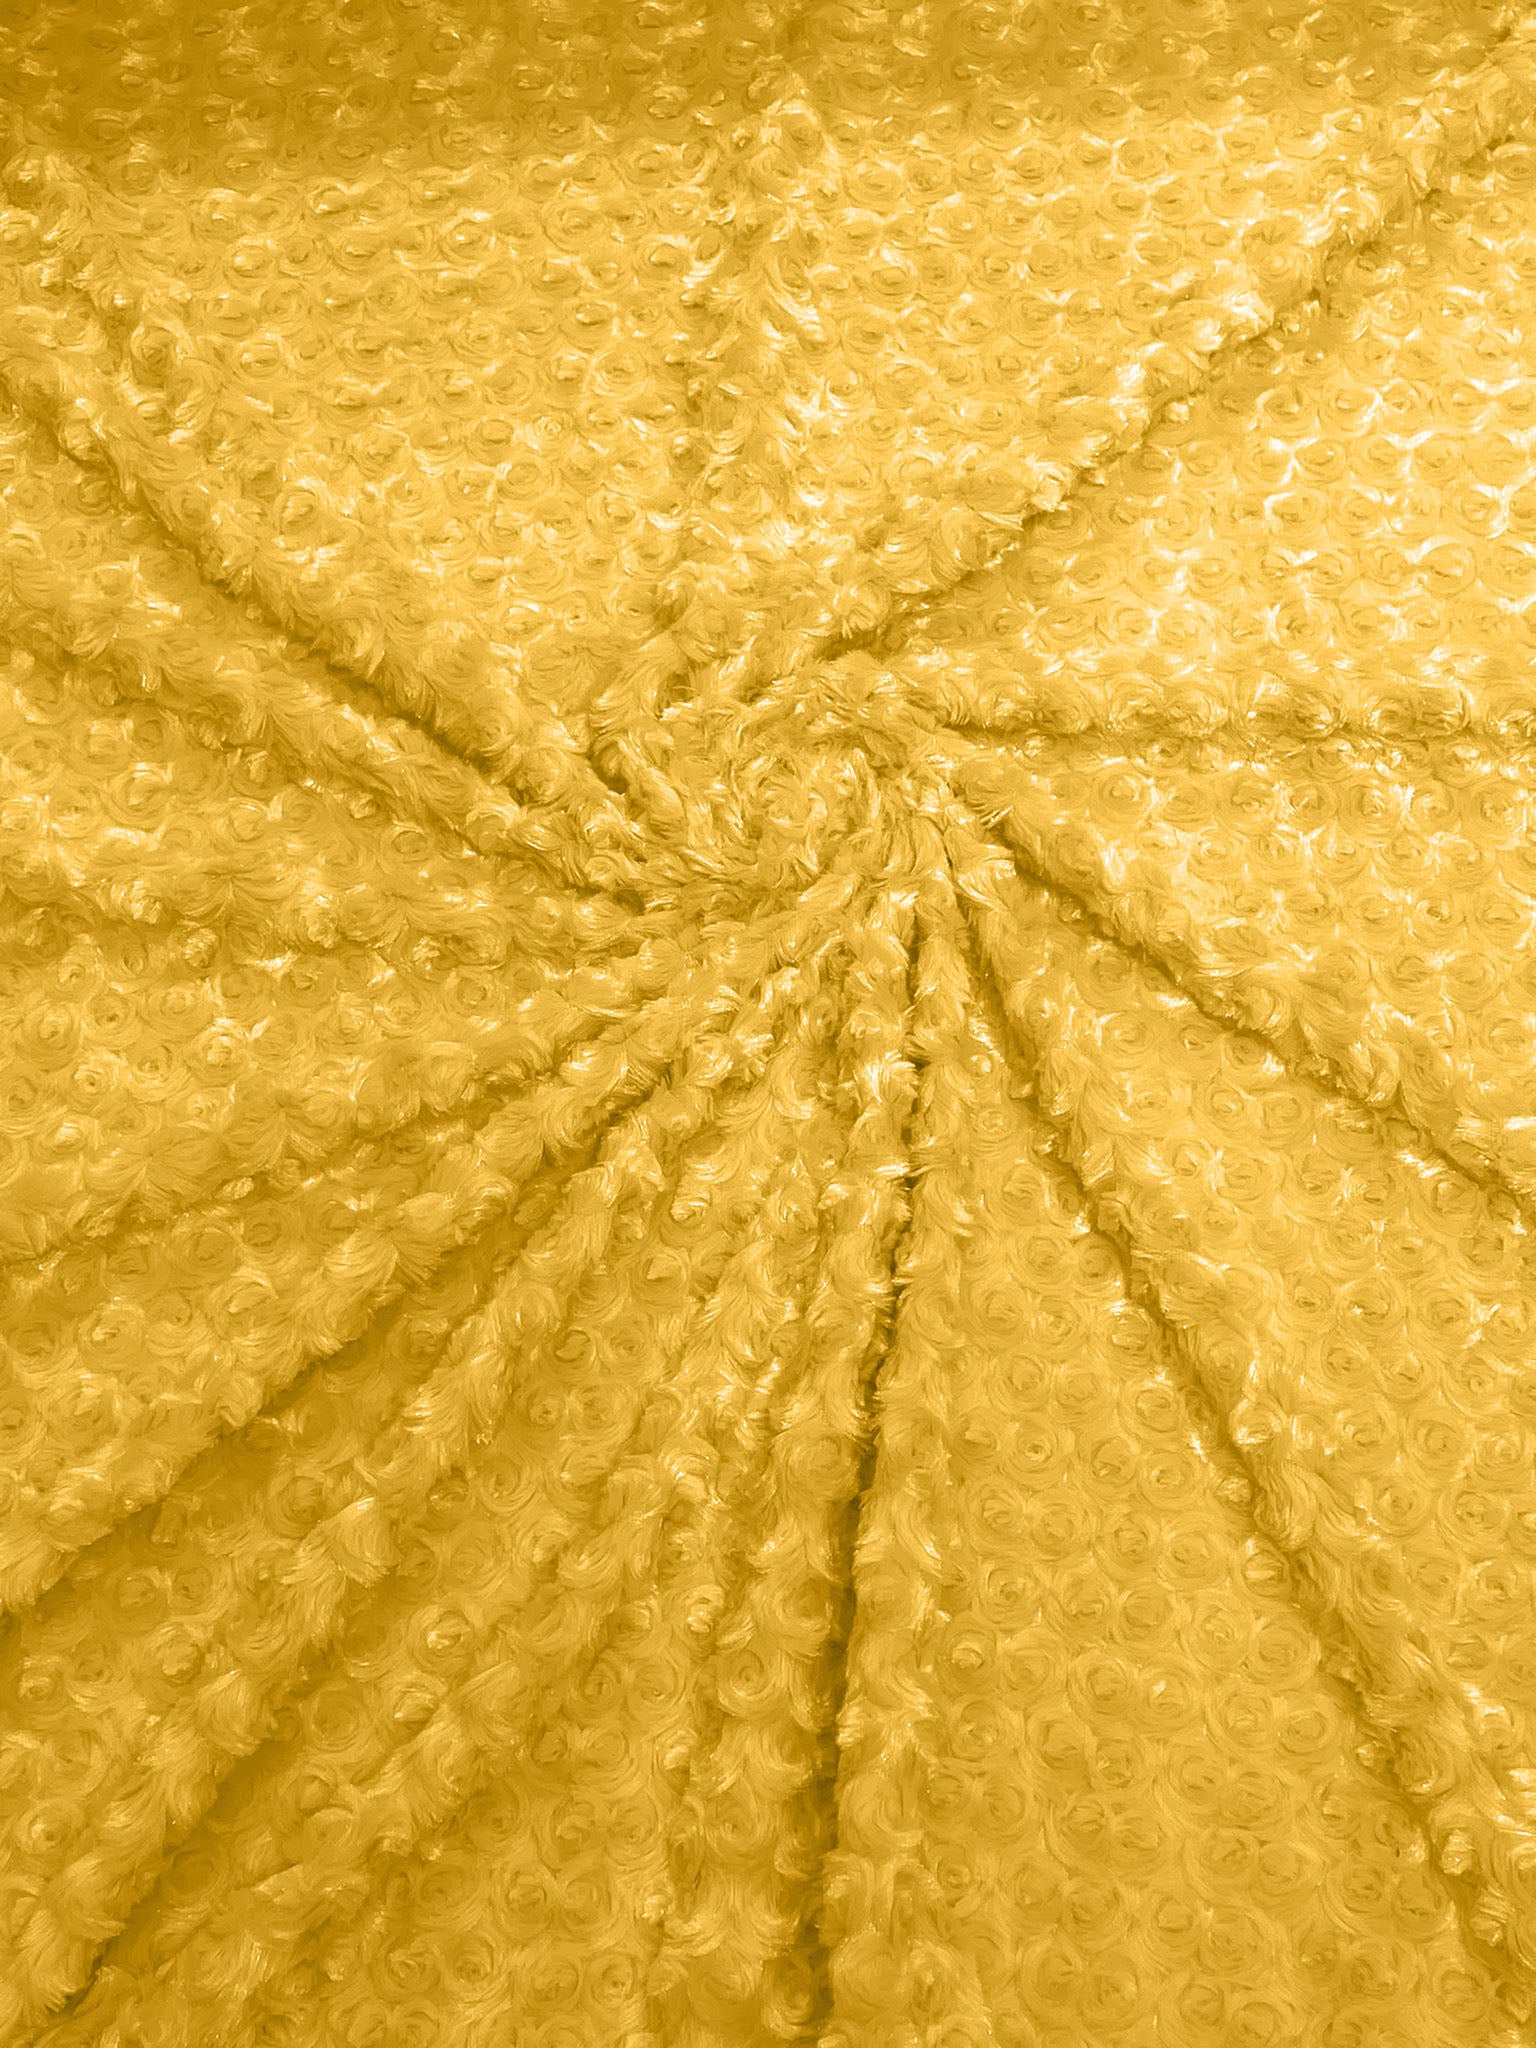 Yellow - Minky Swirl Rose Blossom Ball Rosebud Plush Fur Fabric Polyester- 58" Wide Sold By The Yard